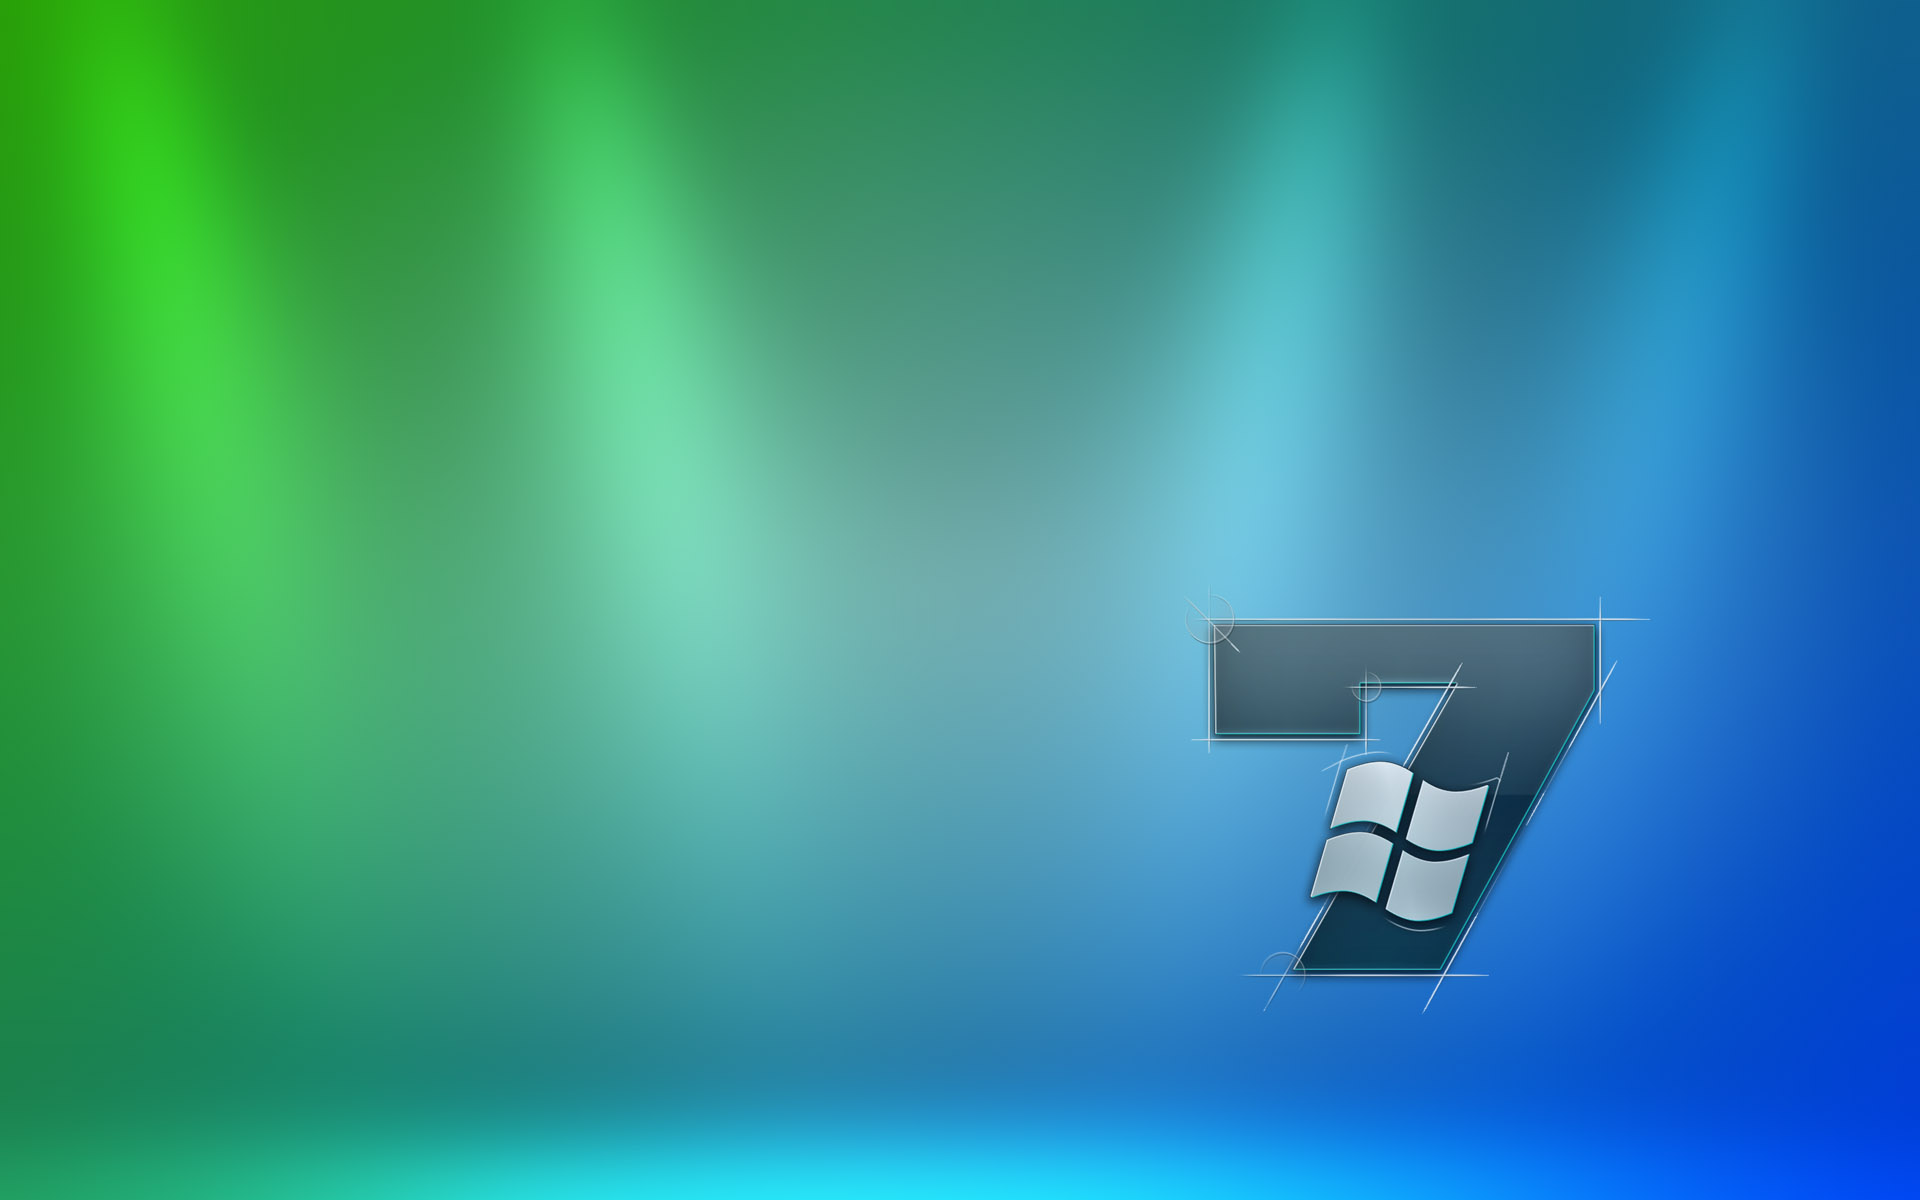 live wallpapers for windows 7 ultimate free download